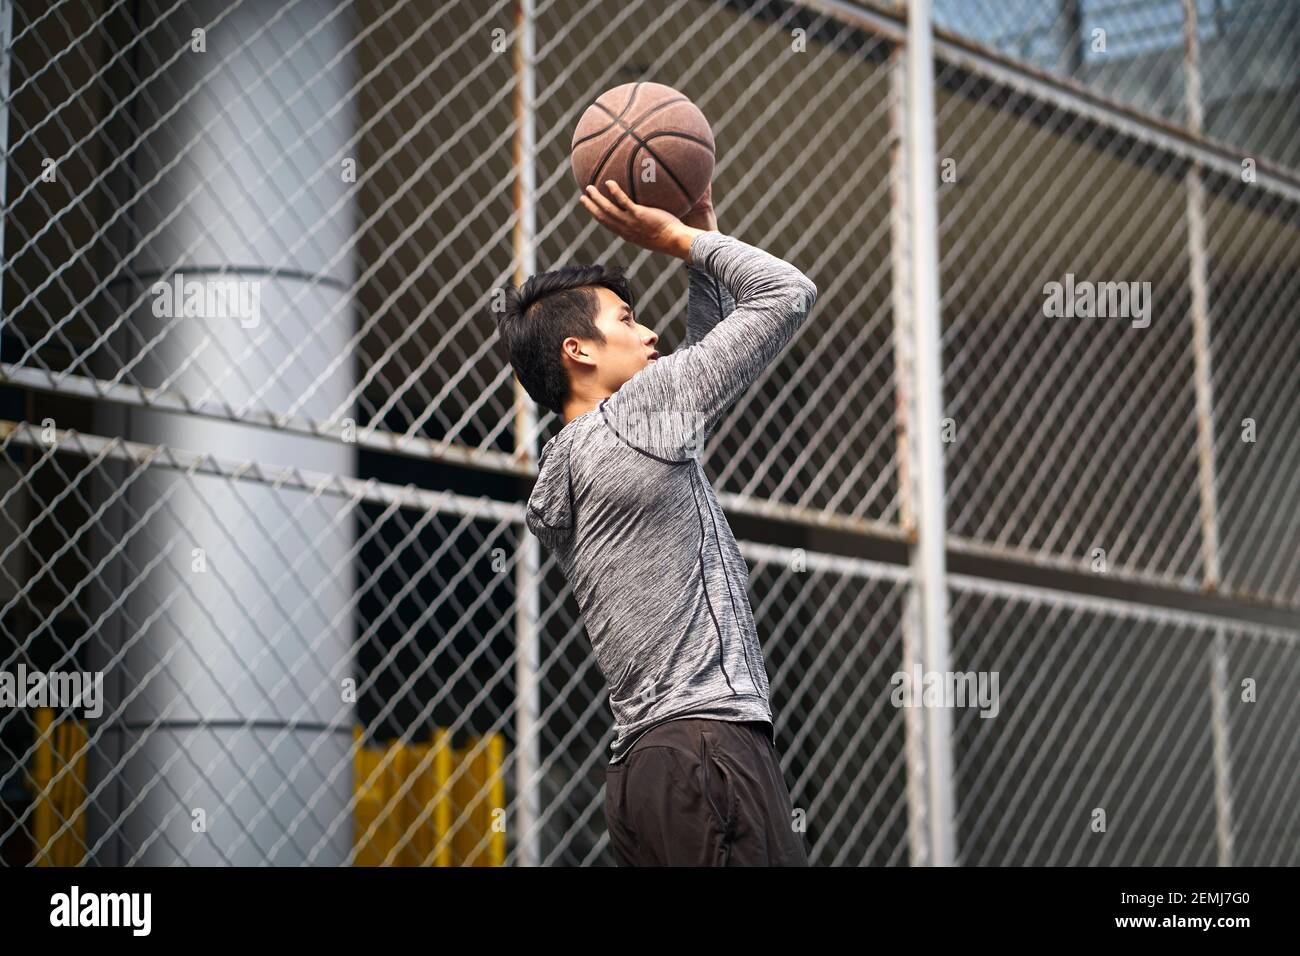 young asian male basketball player taking a jump shot on a fenced outdoor court Stock Photo